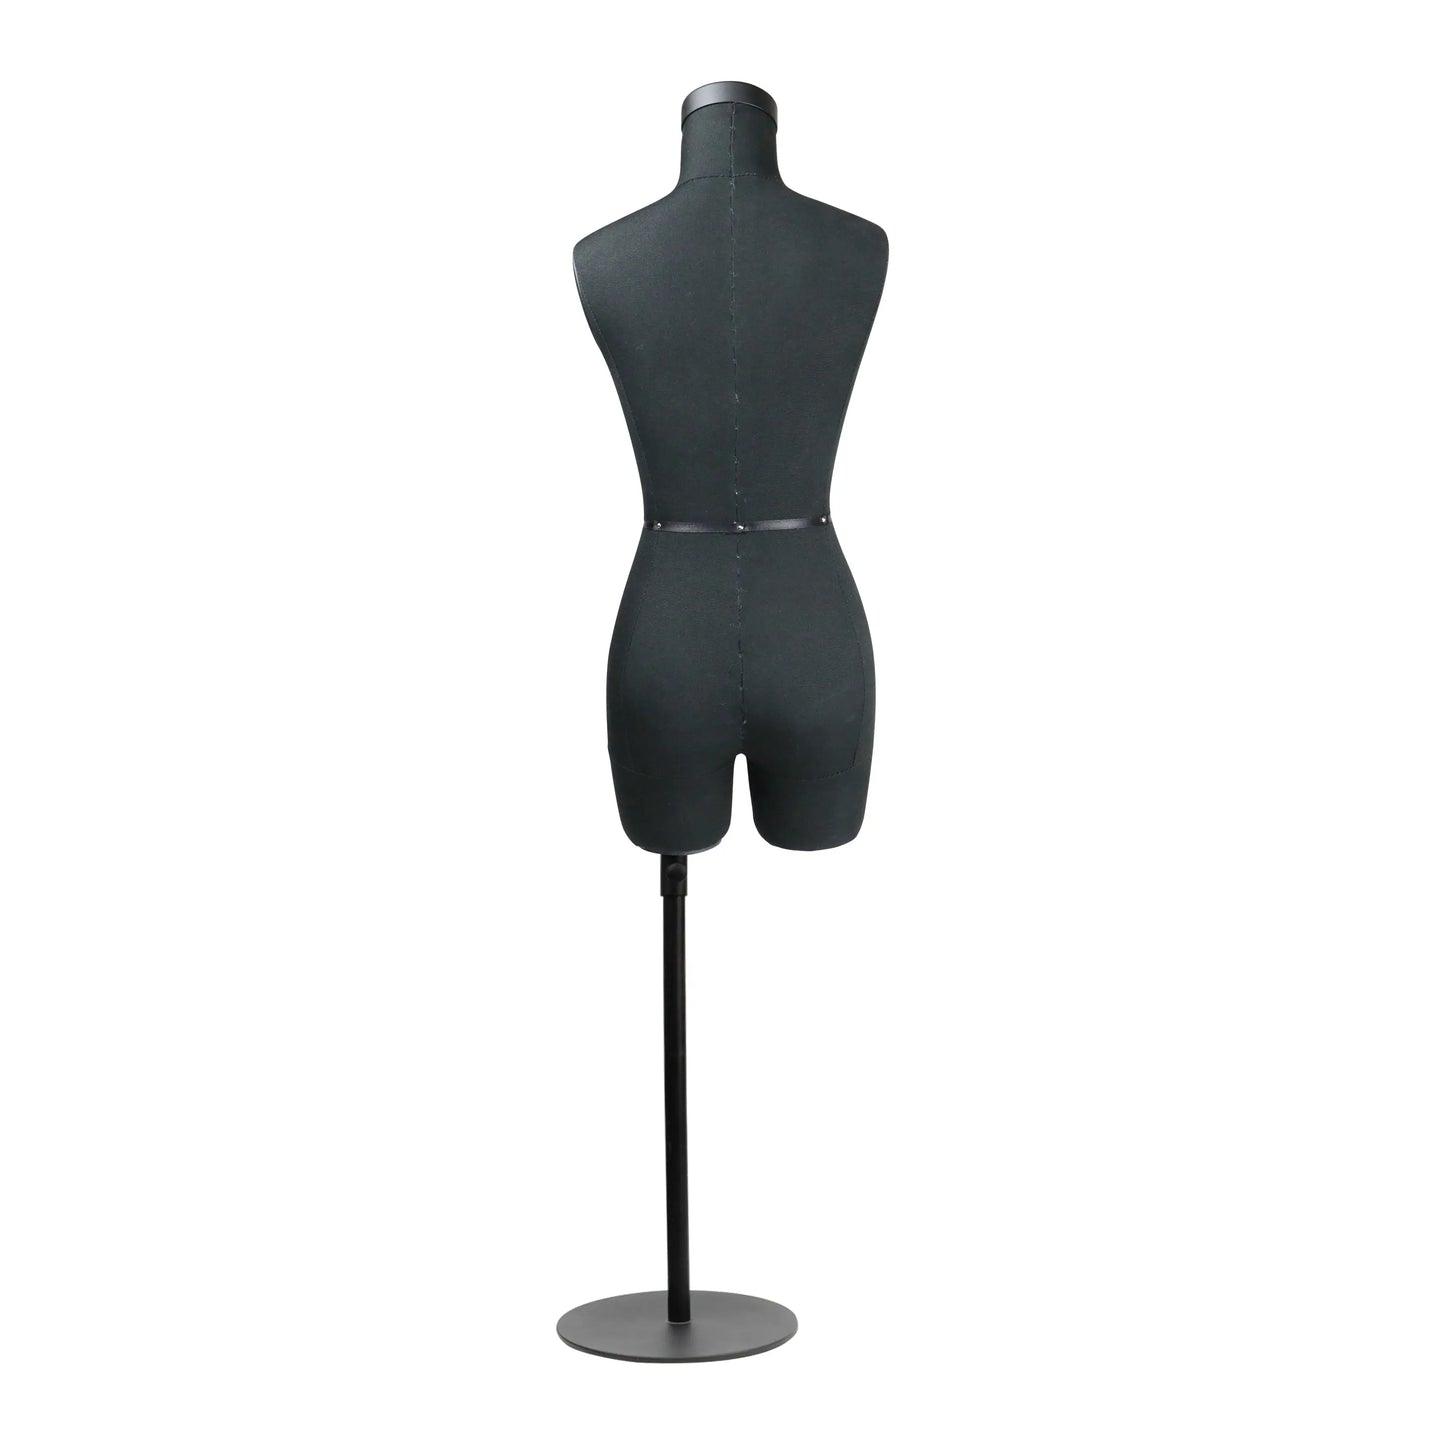 Black SIZE 6 Half Scale Dress Form for Sewing（Not Adult Size）1/2 Mini Fitting Mannequin 43cm Body Height, Female Torso Tailor Model